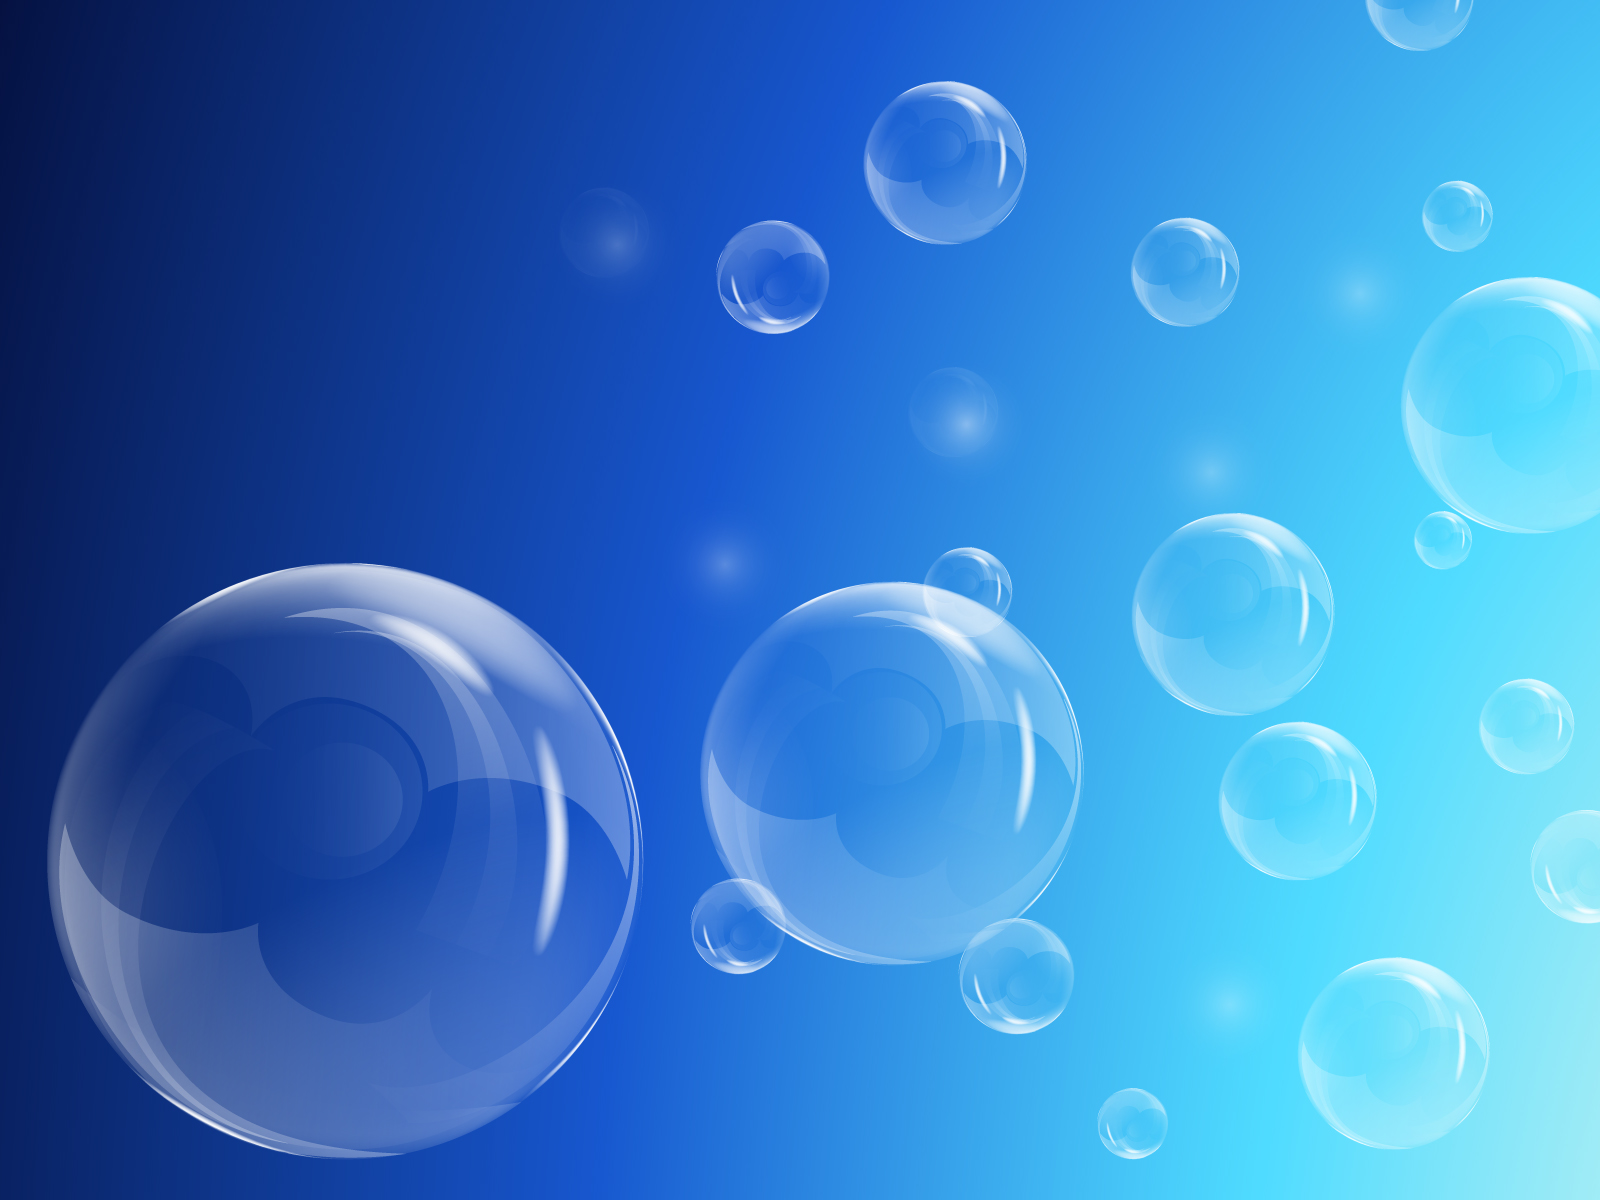 Transparent bubbles background | Daily pics update | HD Wallpapers 